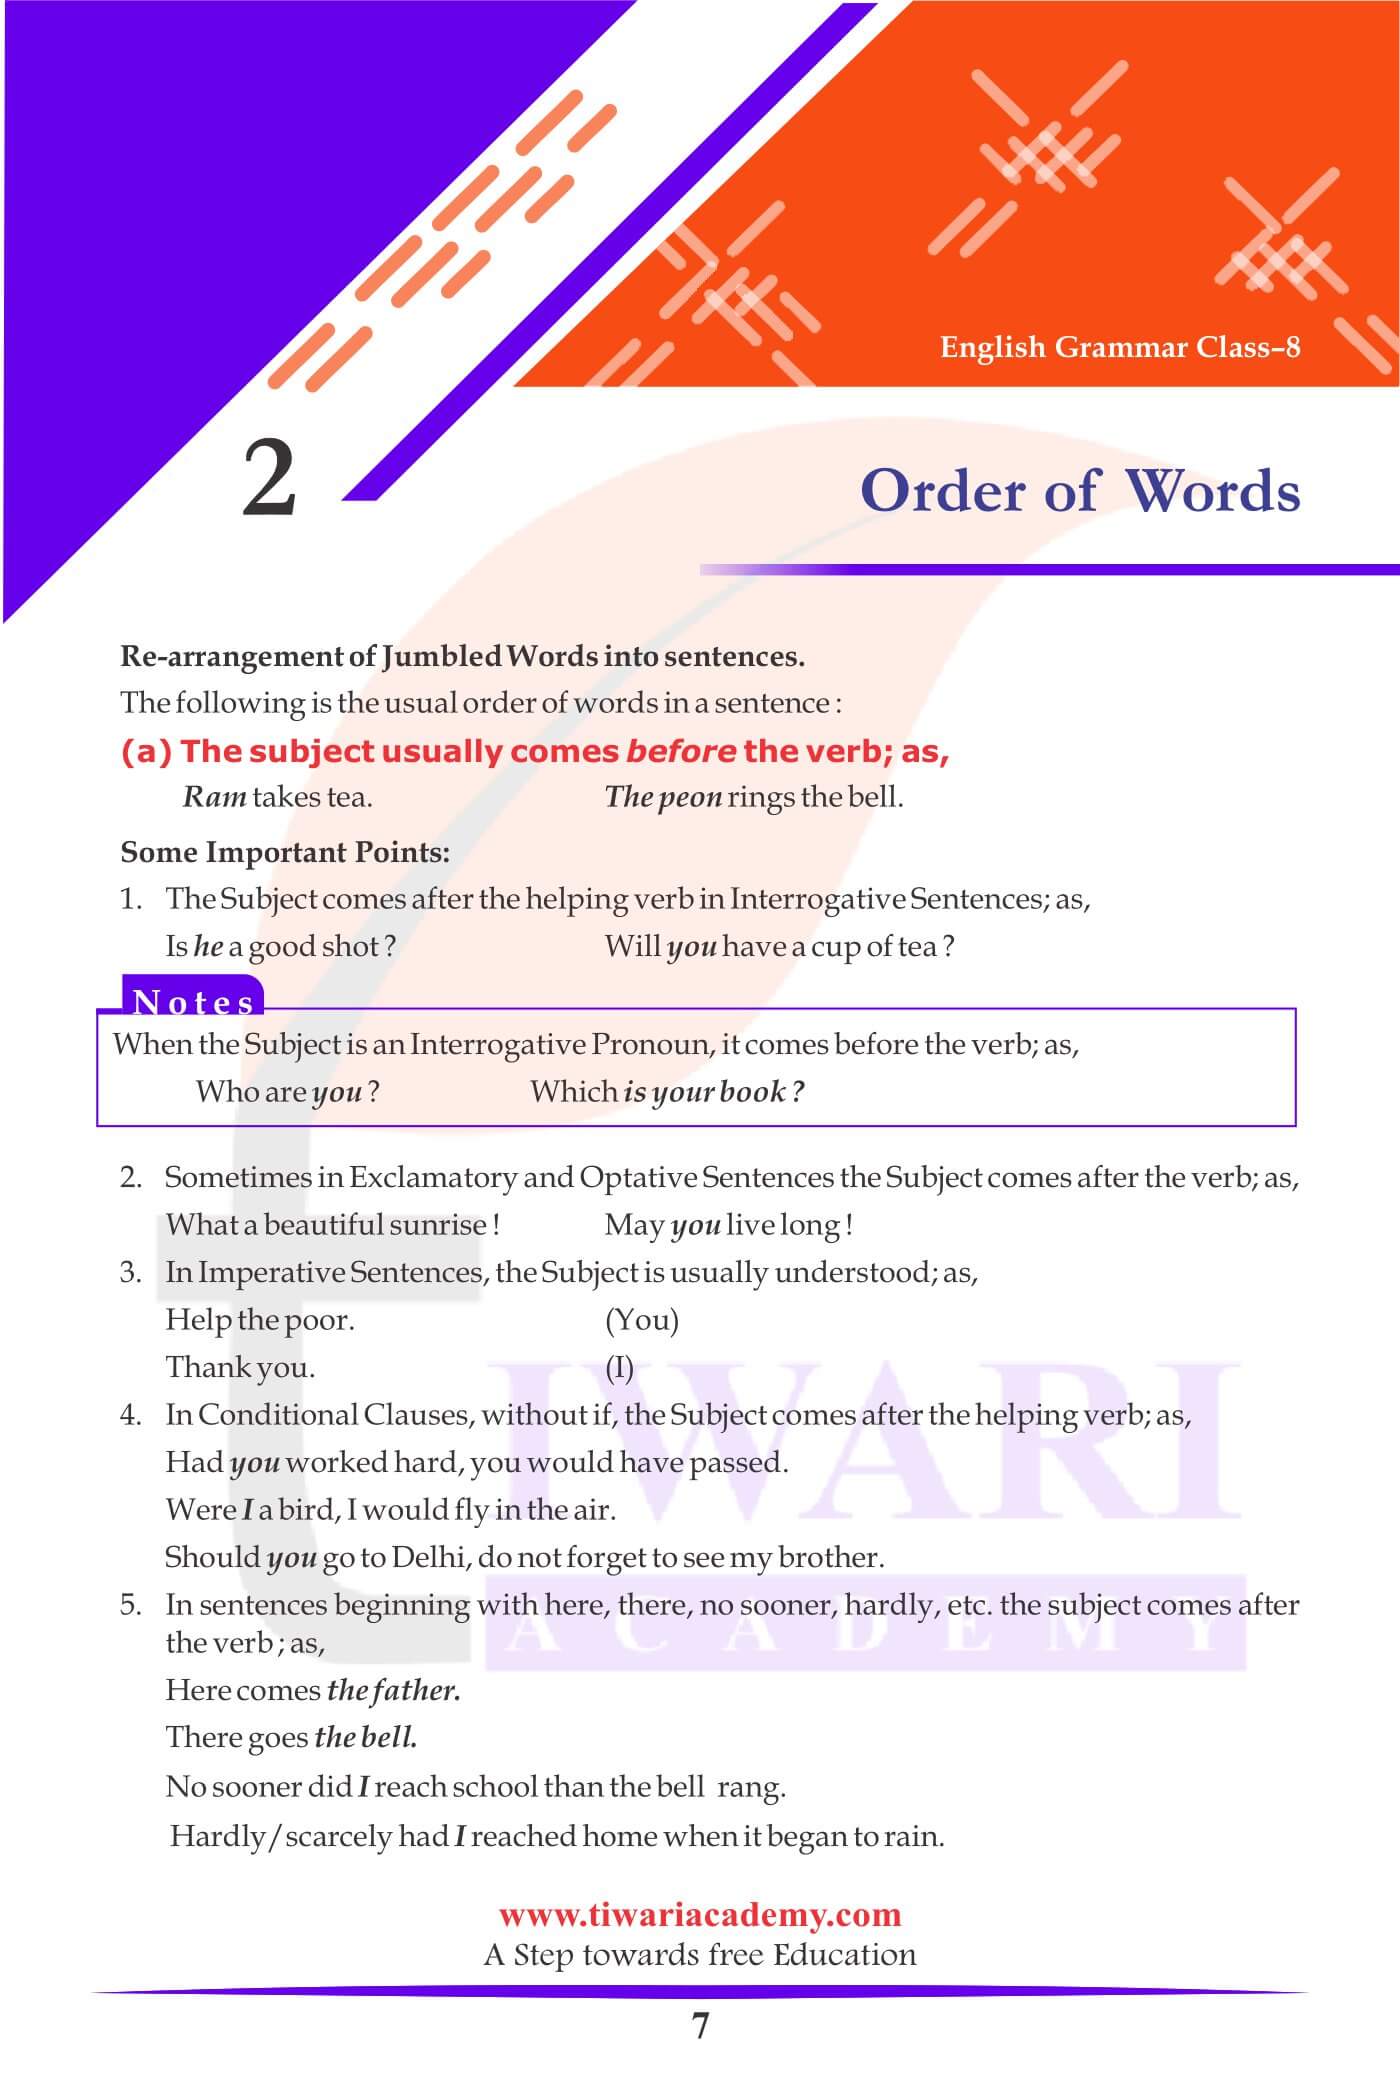 Class 8 English Grammar Chapter 2 Order of Words